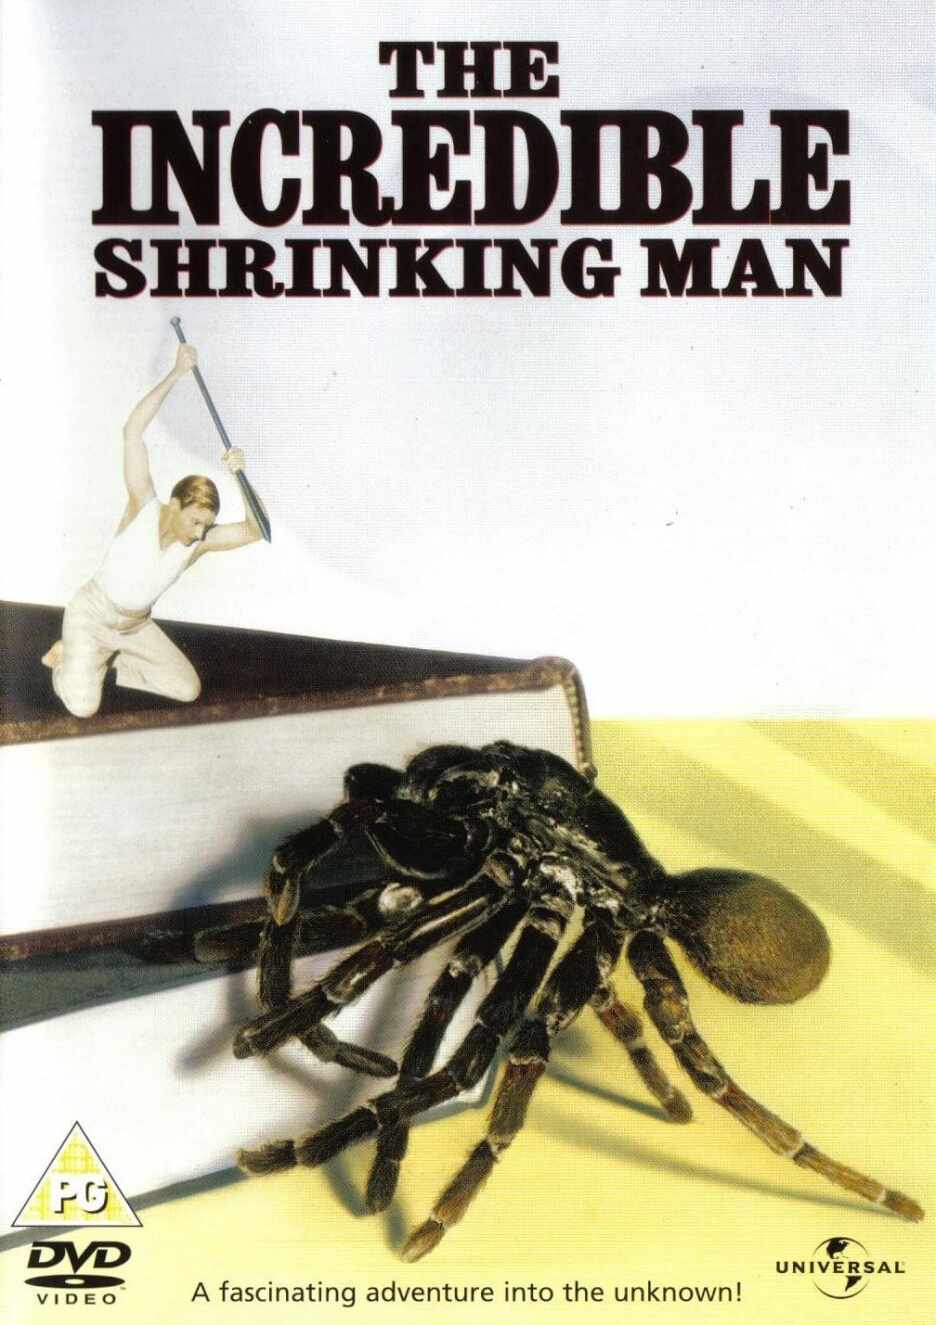 The Incredible Shrinking Man | Jack Arnold